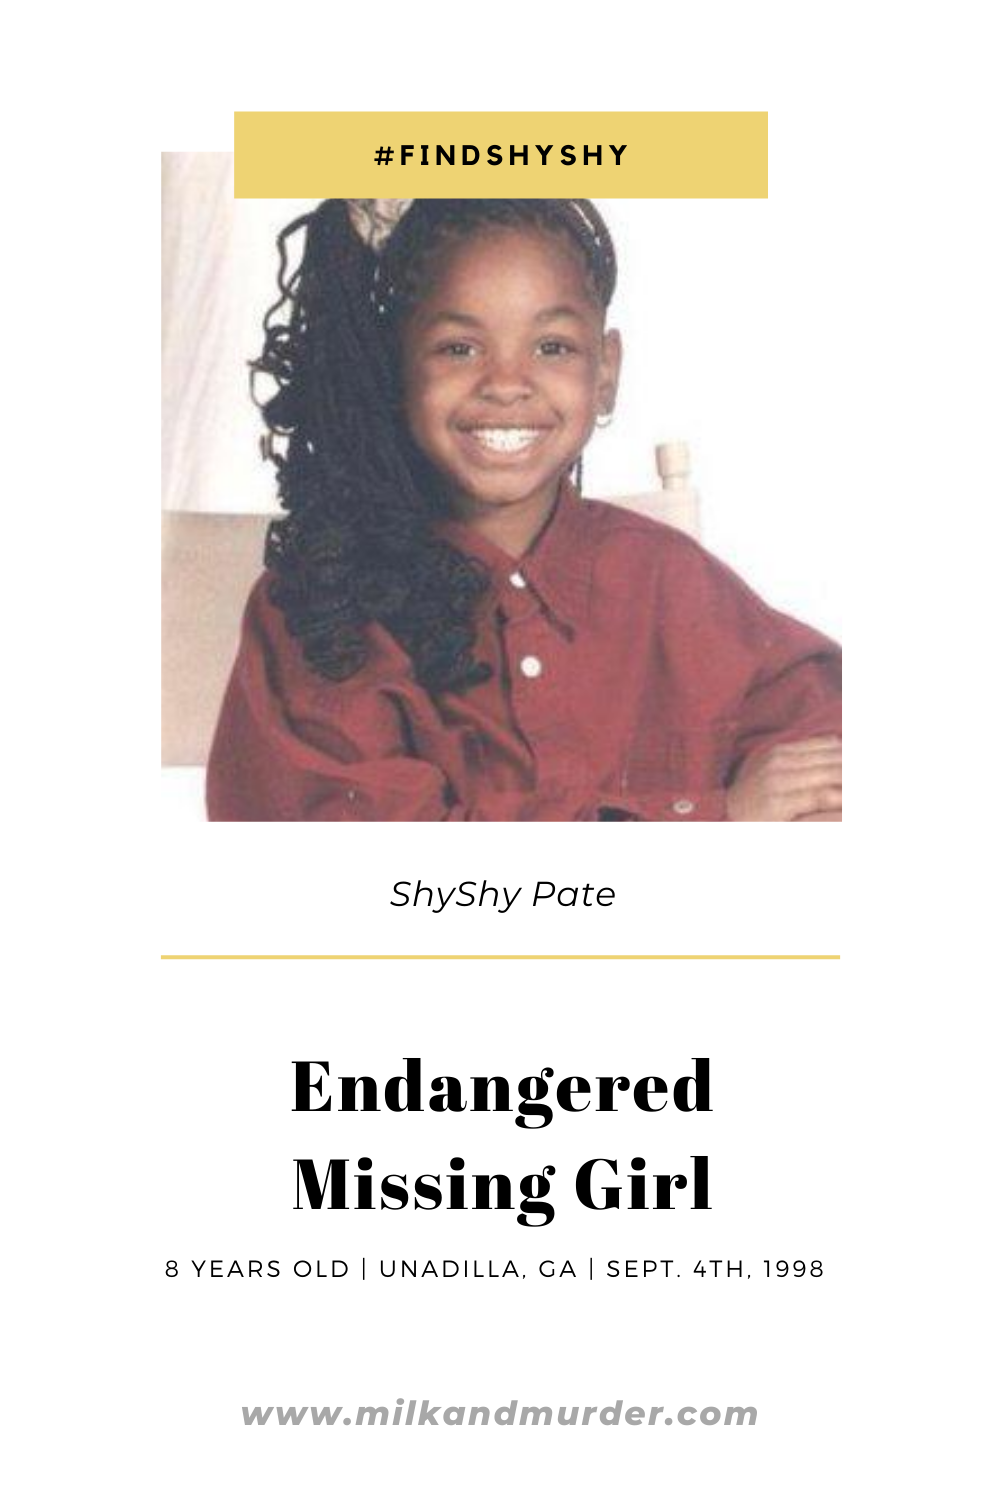 shyshy-pate-missing-milk-and-murder-podcast (1).png